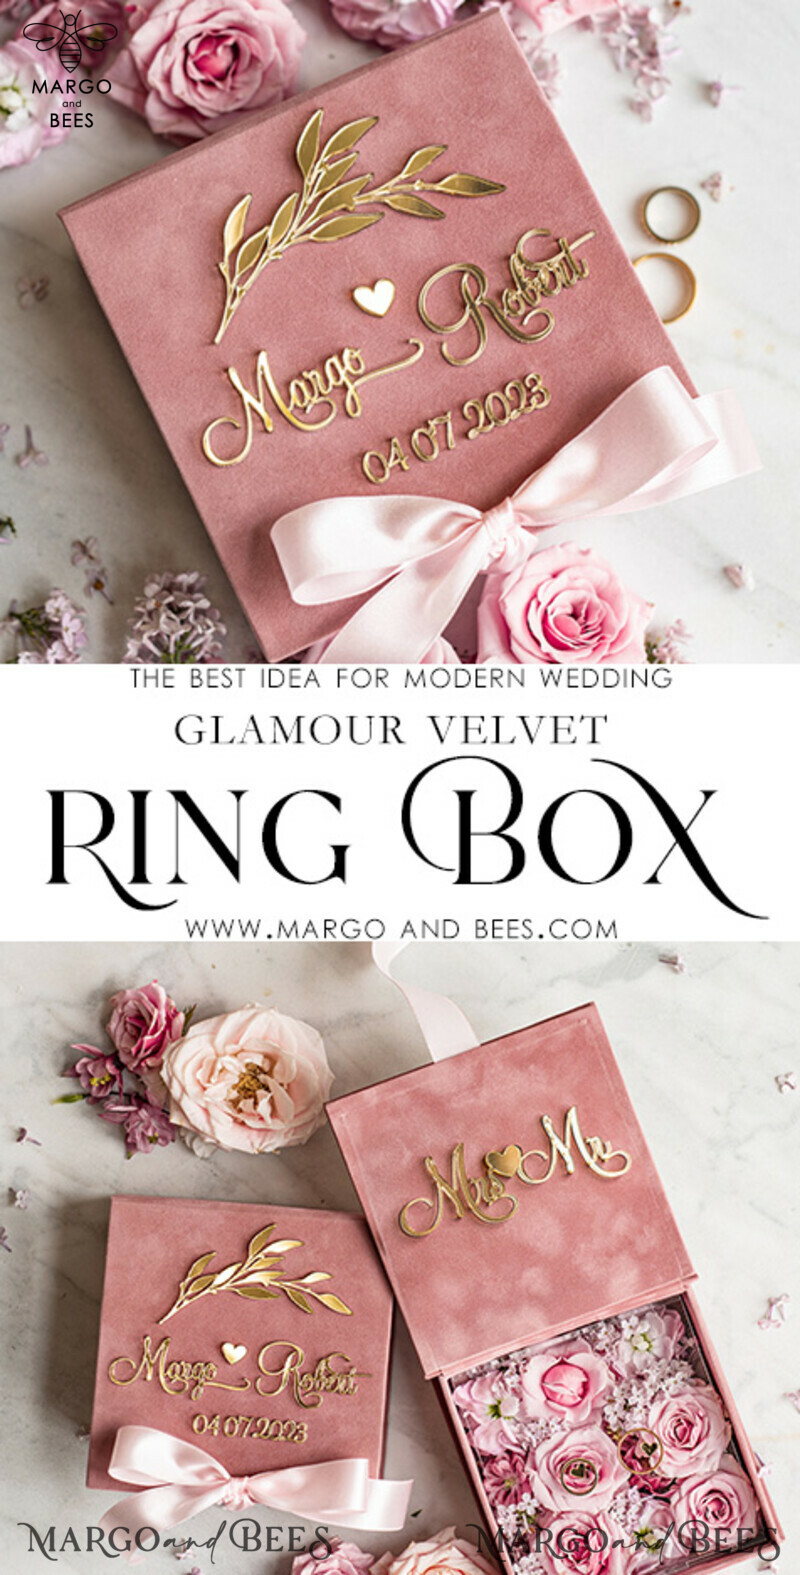 Luxury Blush Pink Golden Velvet Wedding Ring Box for Glamorous Ceremony: Custom Colors Available for His and Hers Rings-3